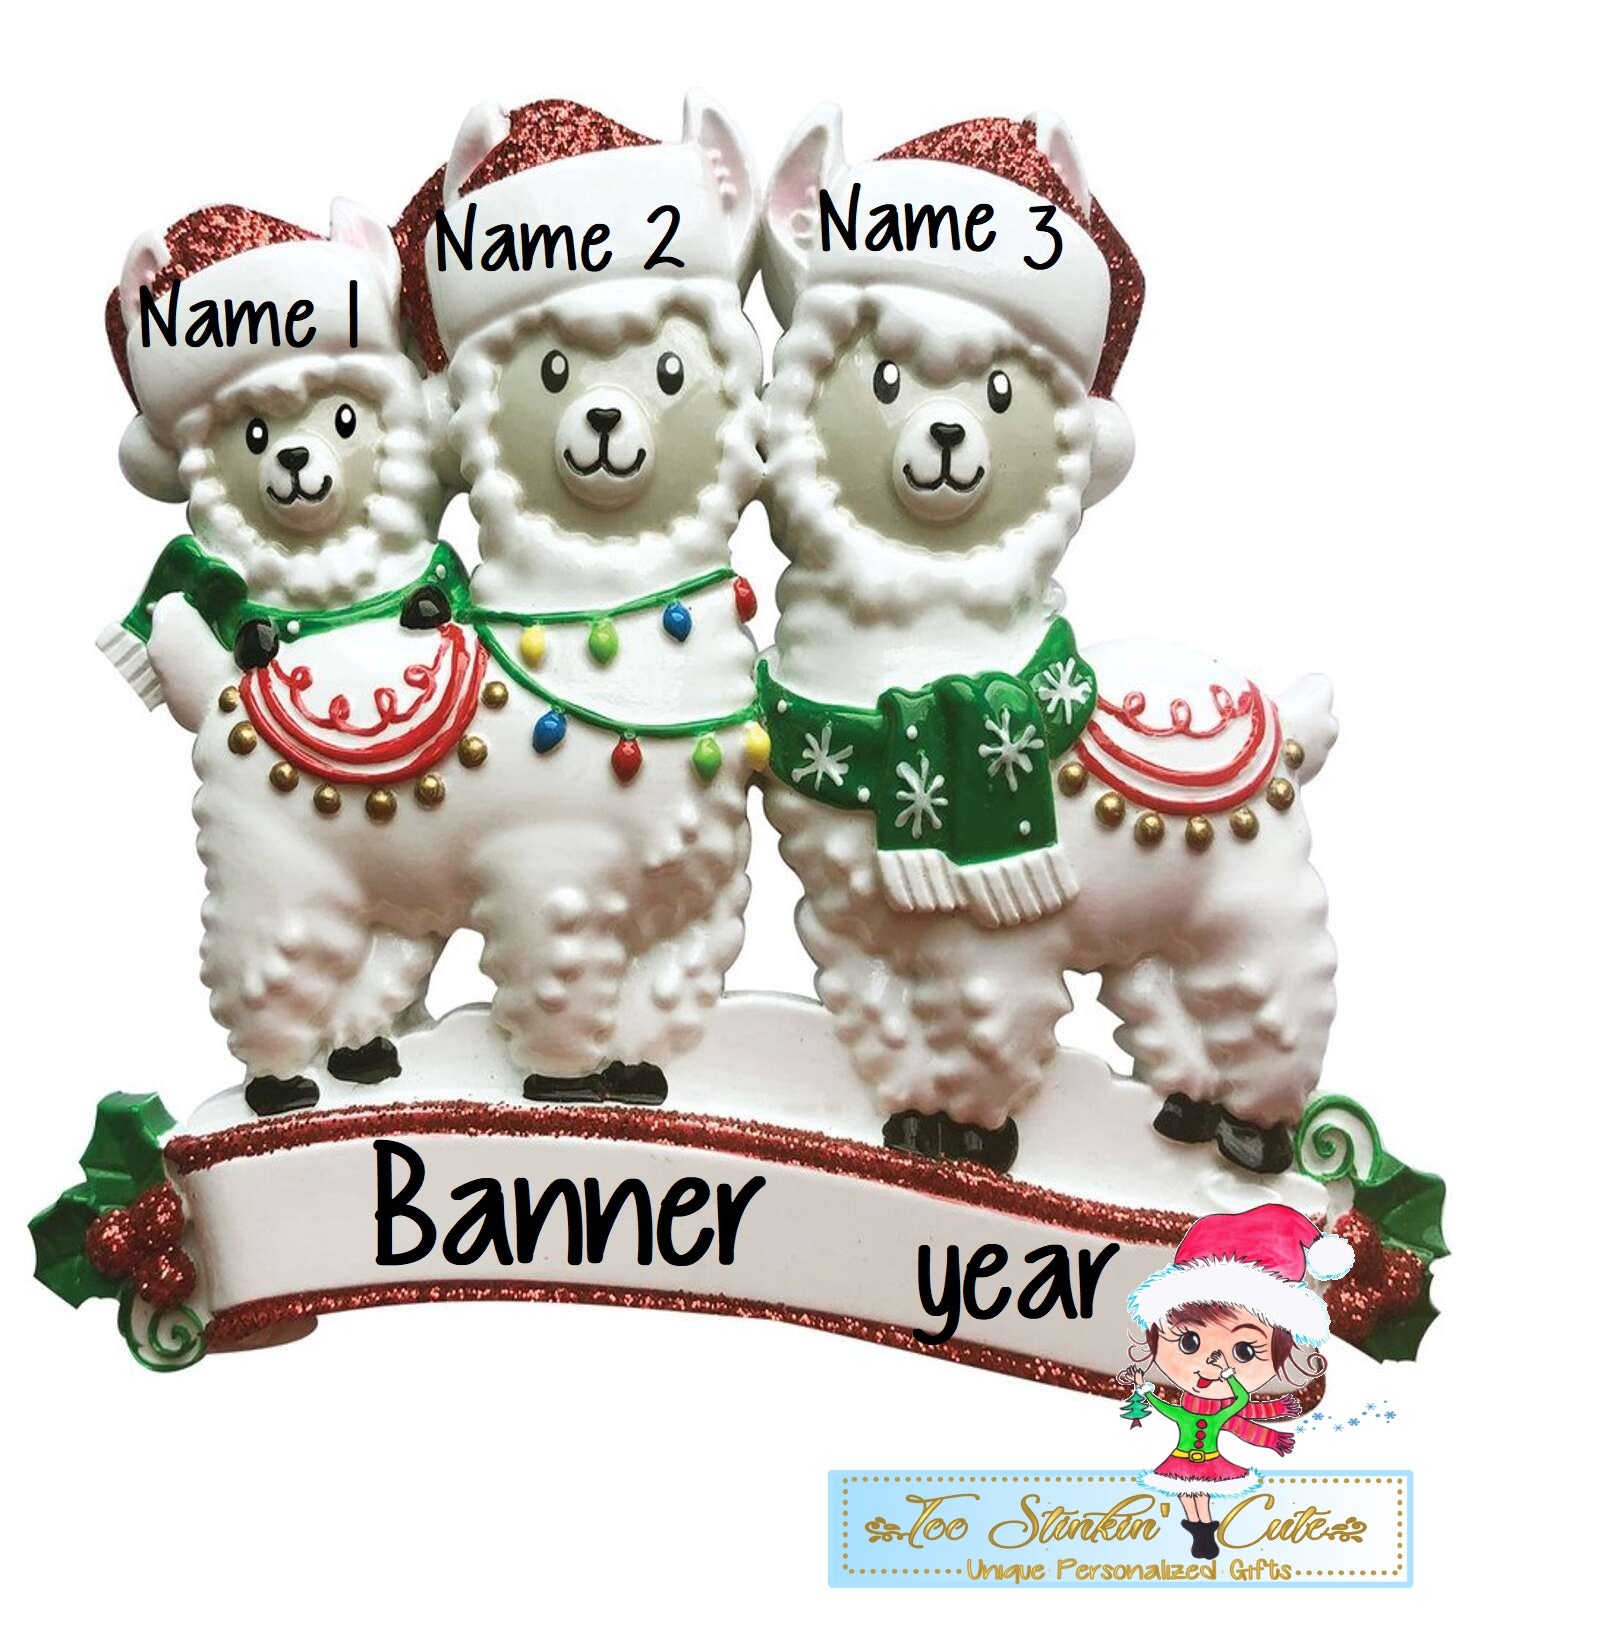 Llama Family of 3 Personalized Christmas Ornament + Free Shipping